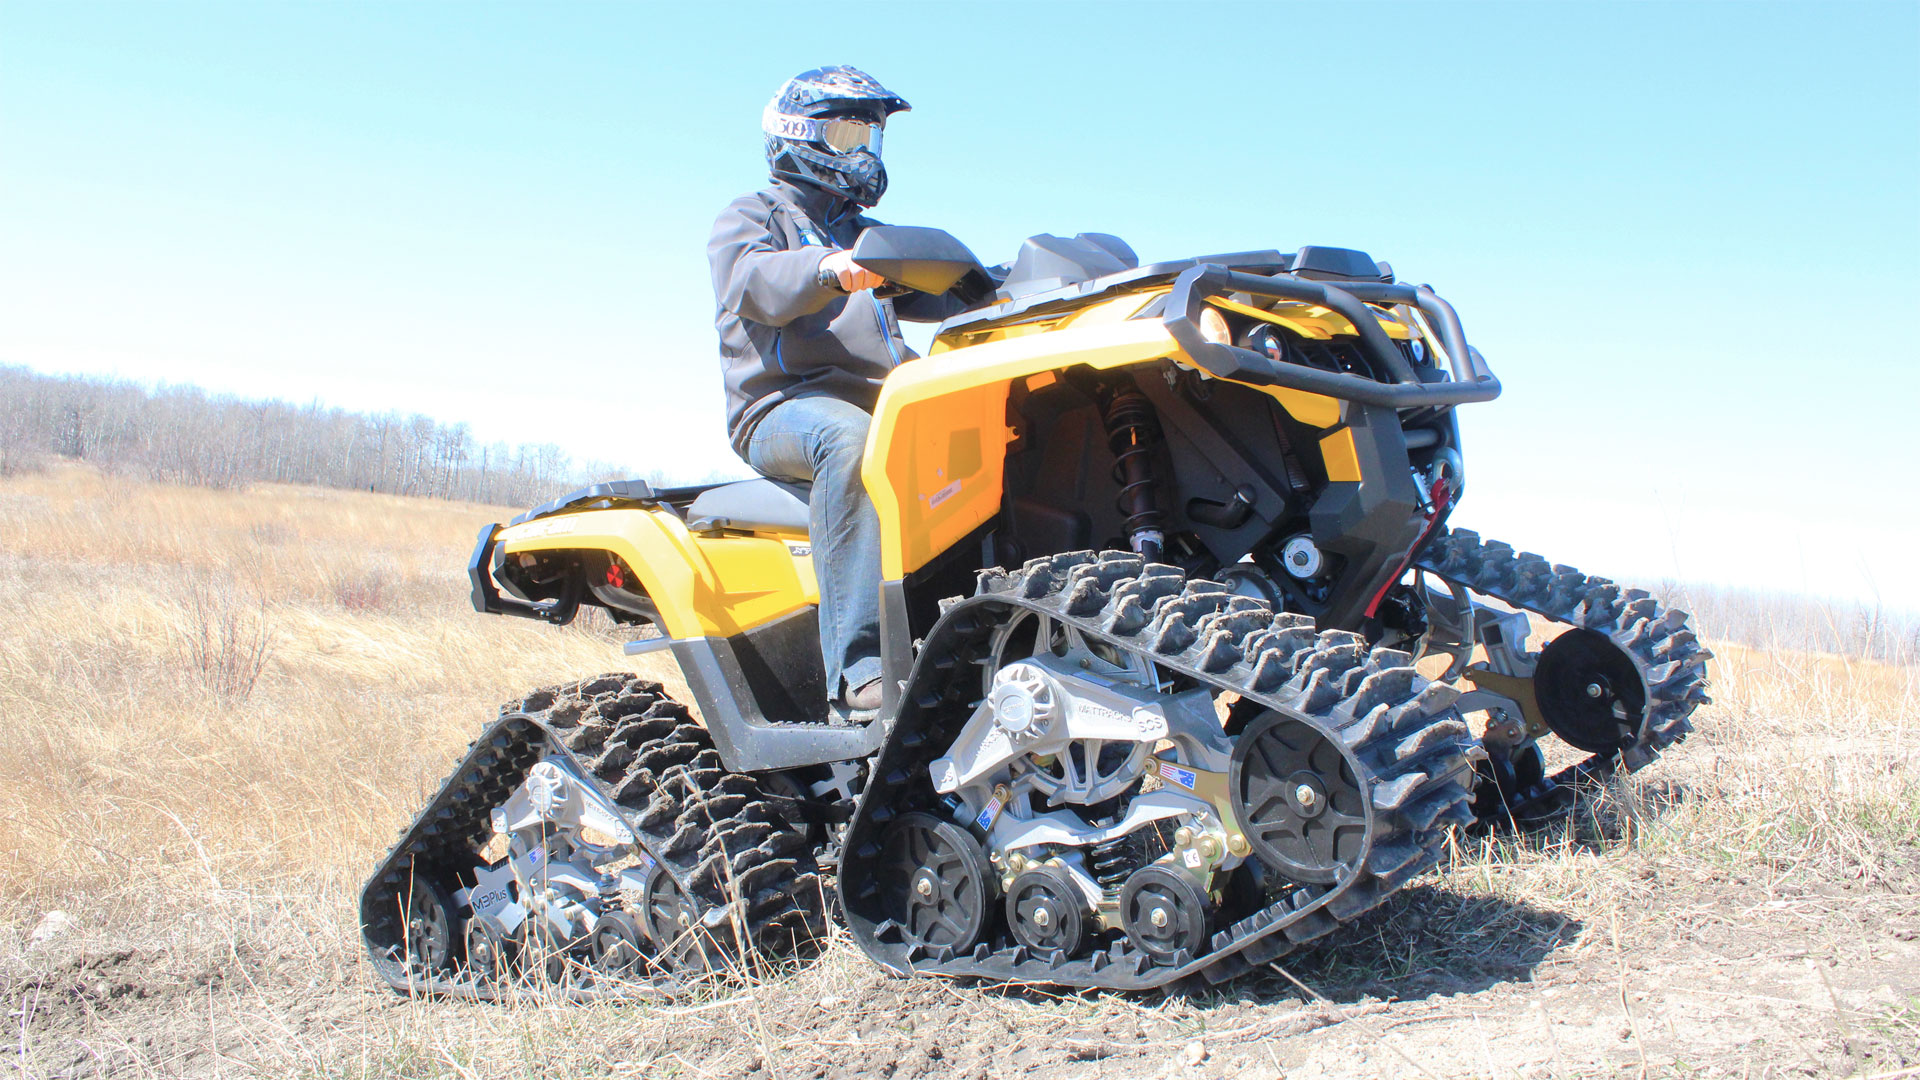 M3 Tracks on a Can-am Outlander